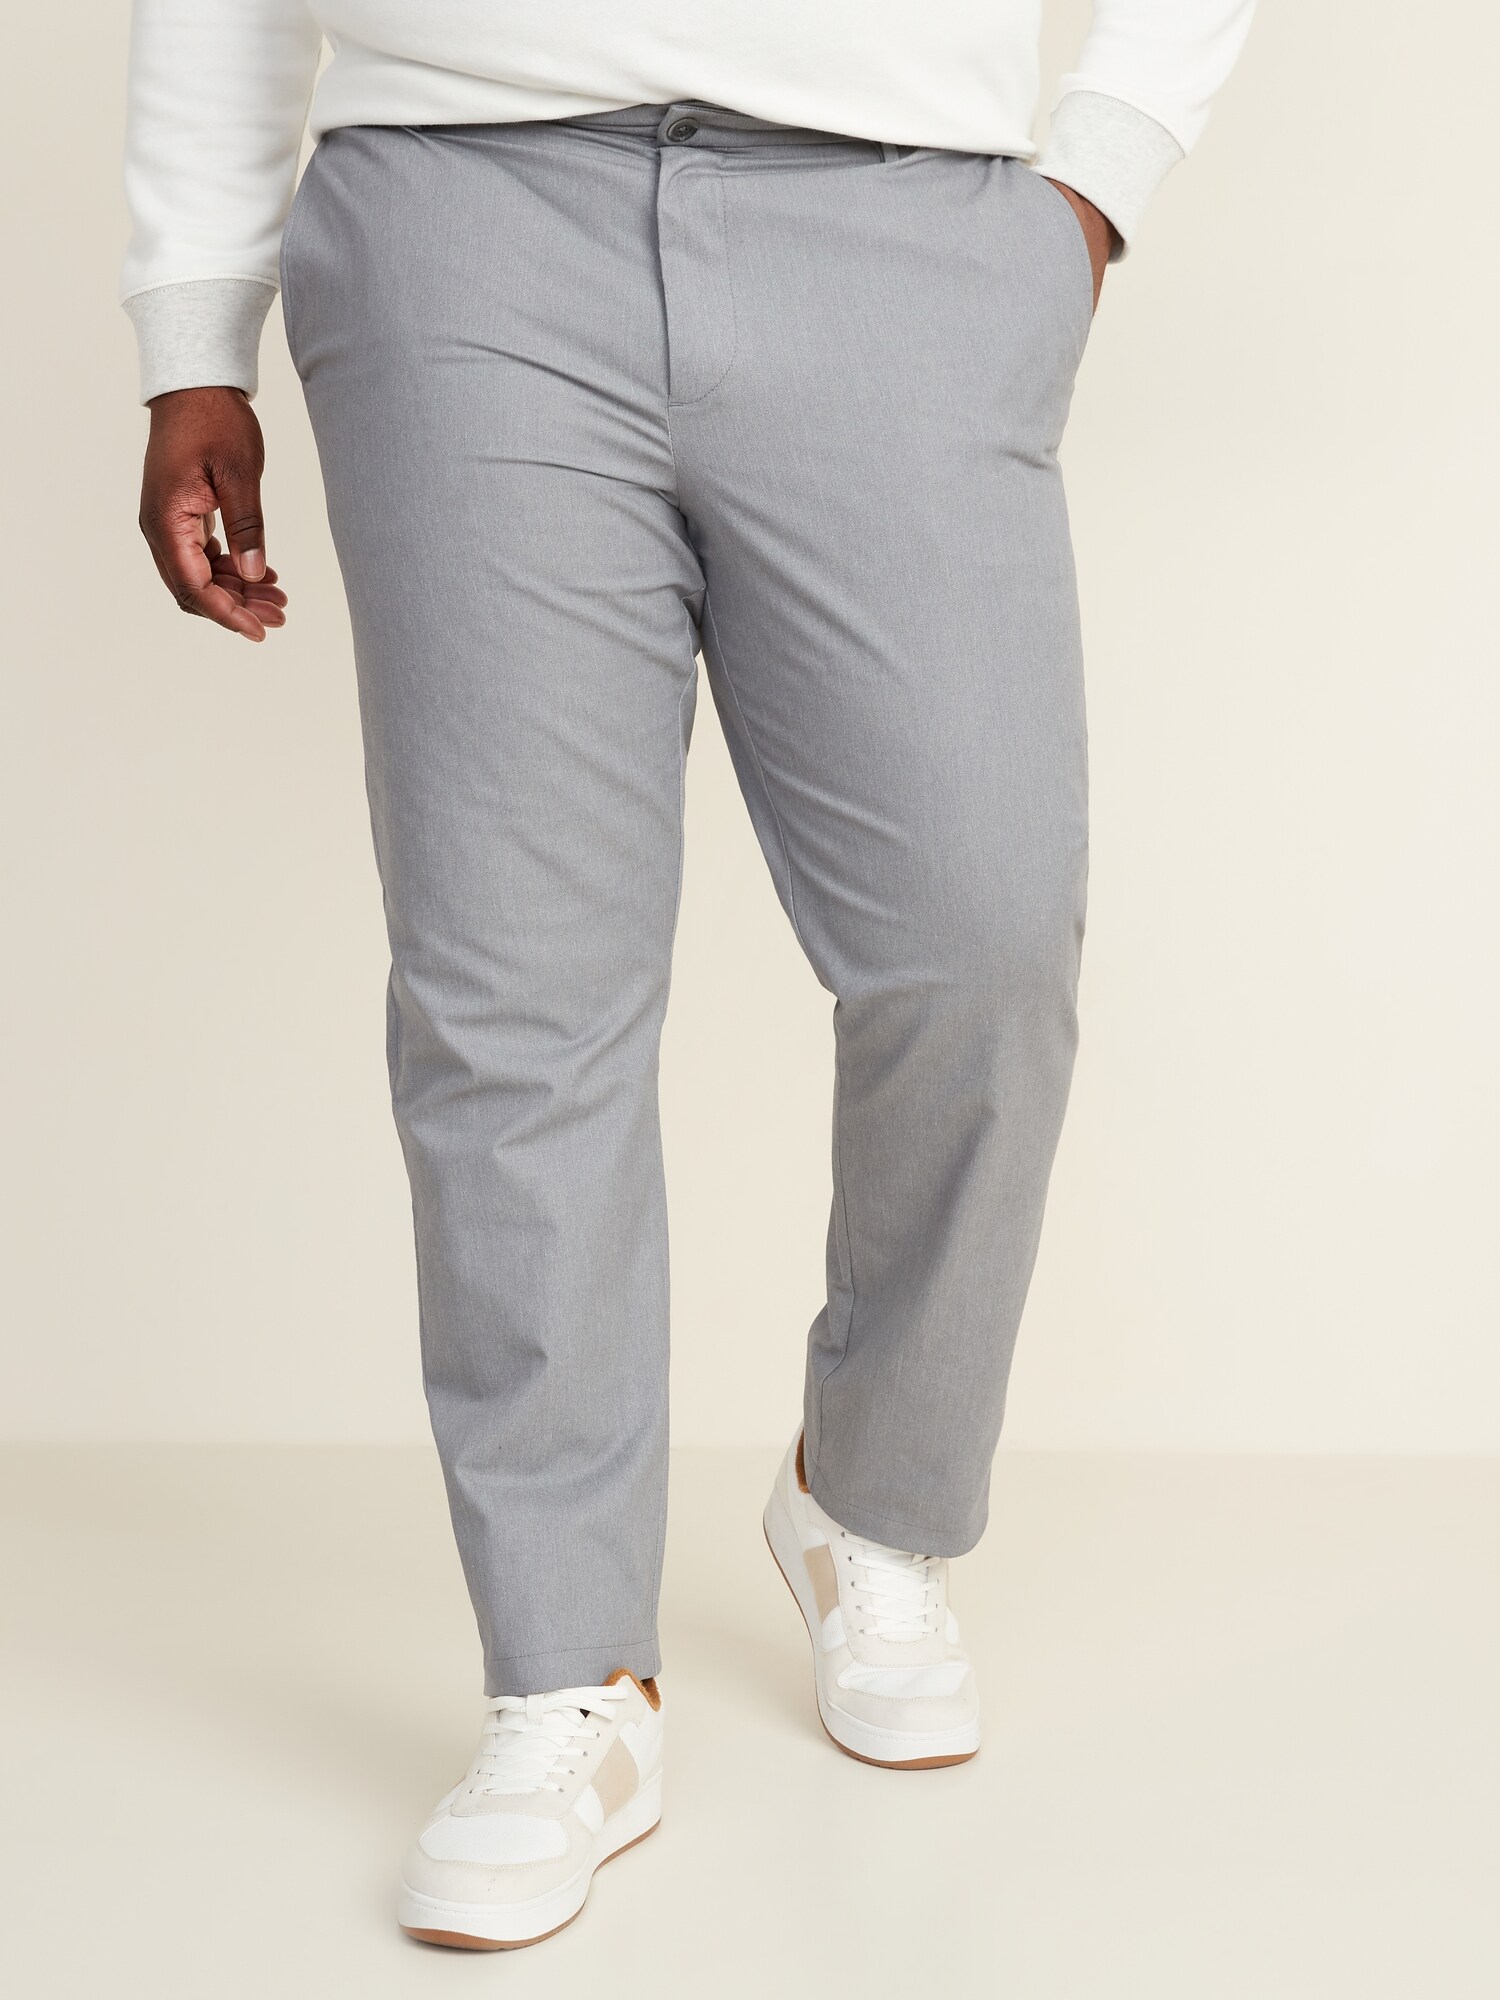 All-New Slim Ultimate Built-In Flex Textured Chinos for Men | Old Navy